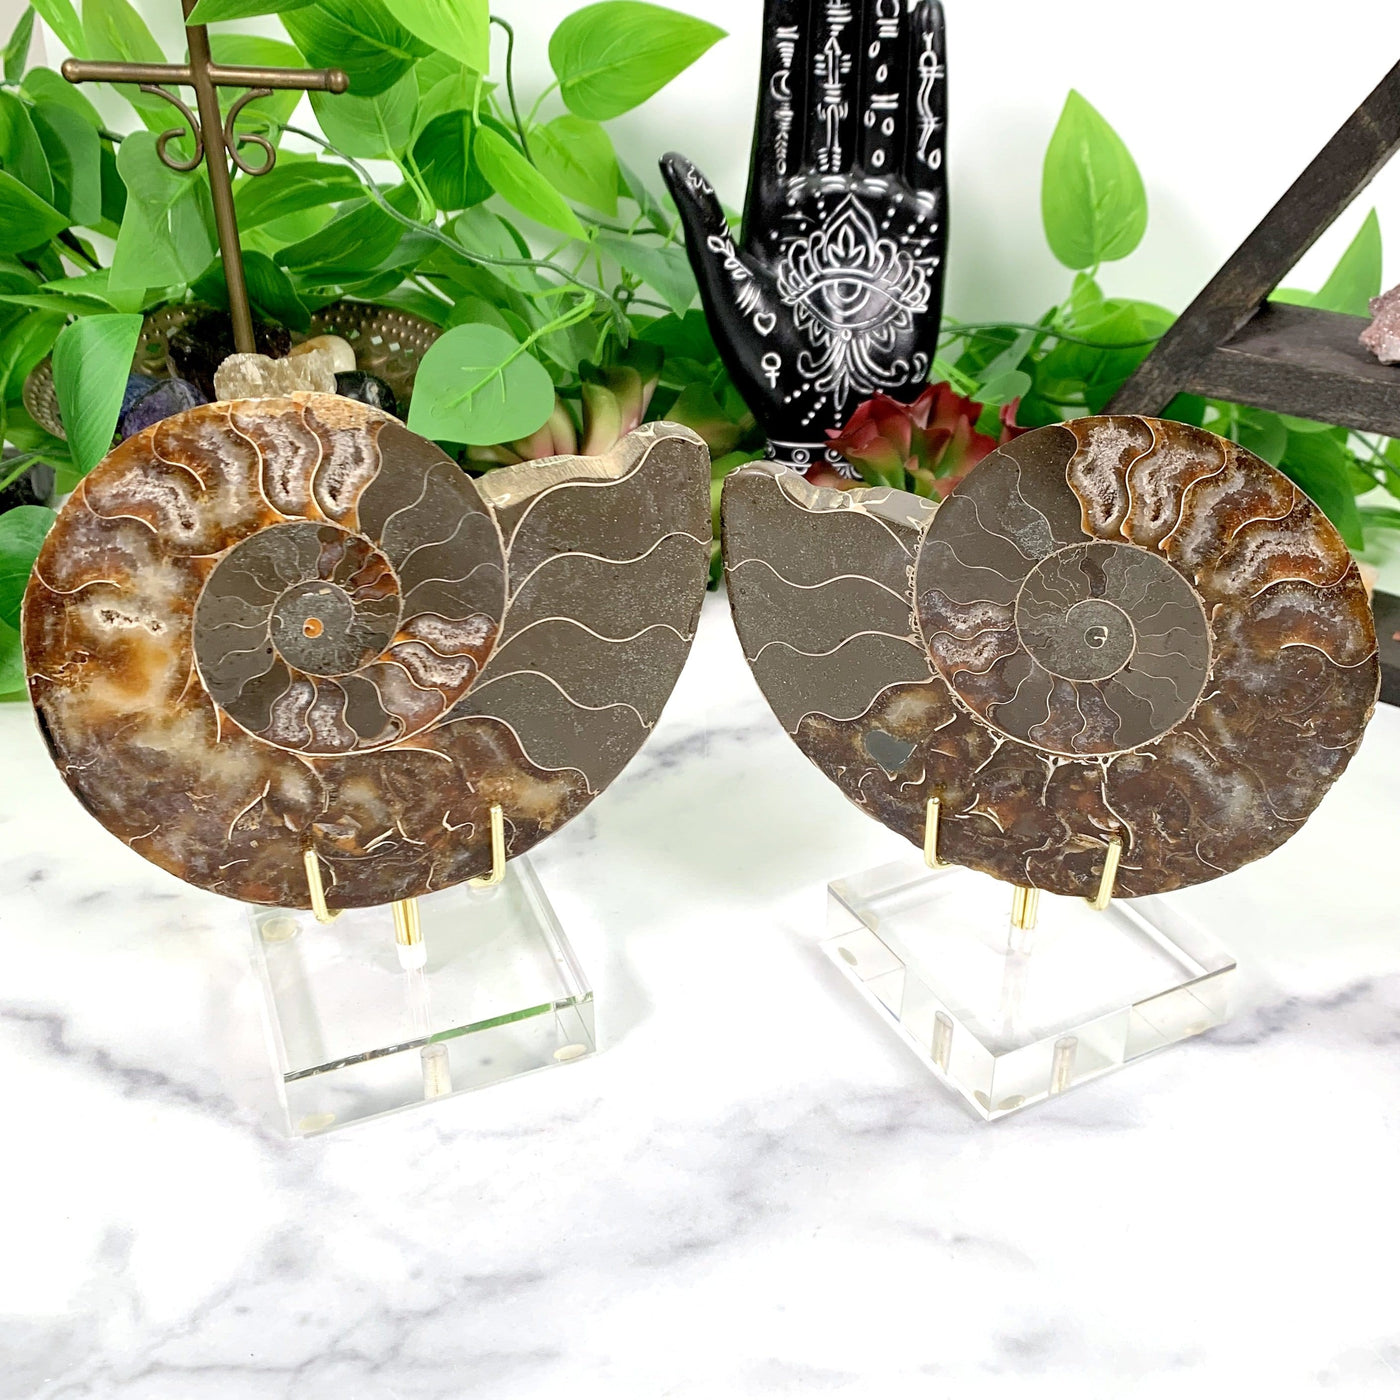 2 Products Ammonite Fossils with decorations in the background